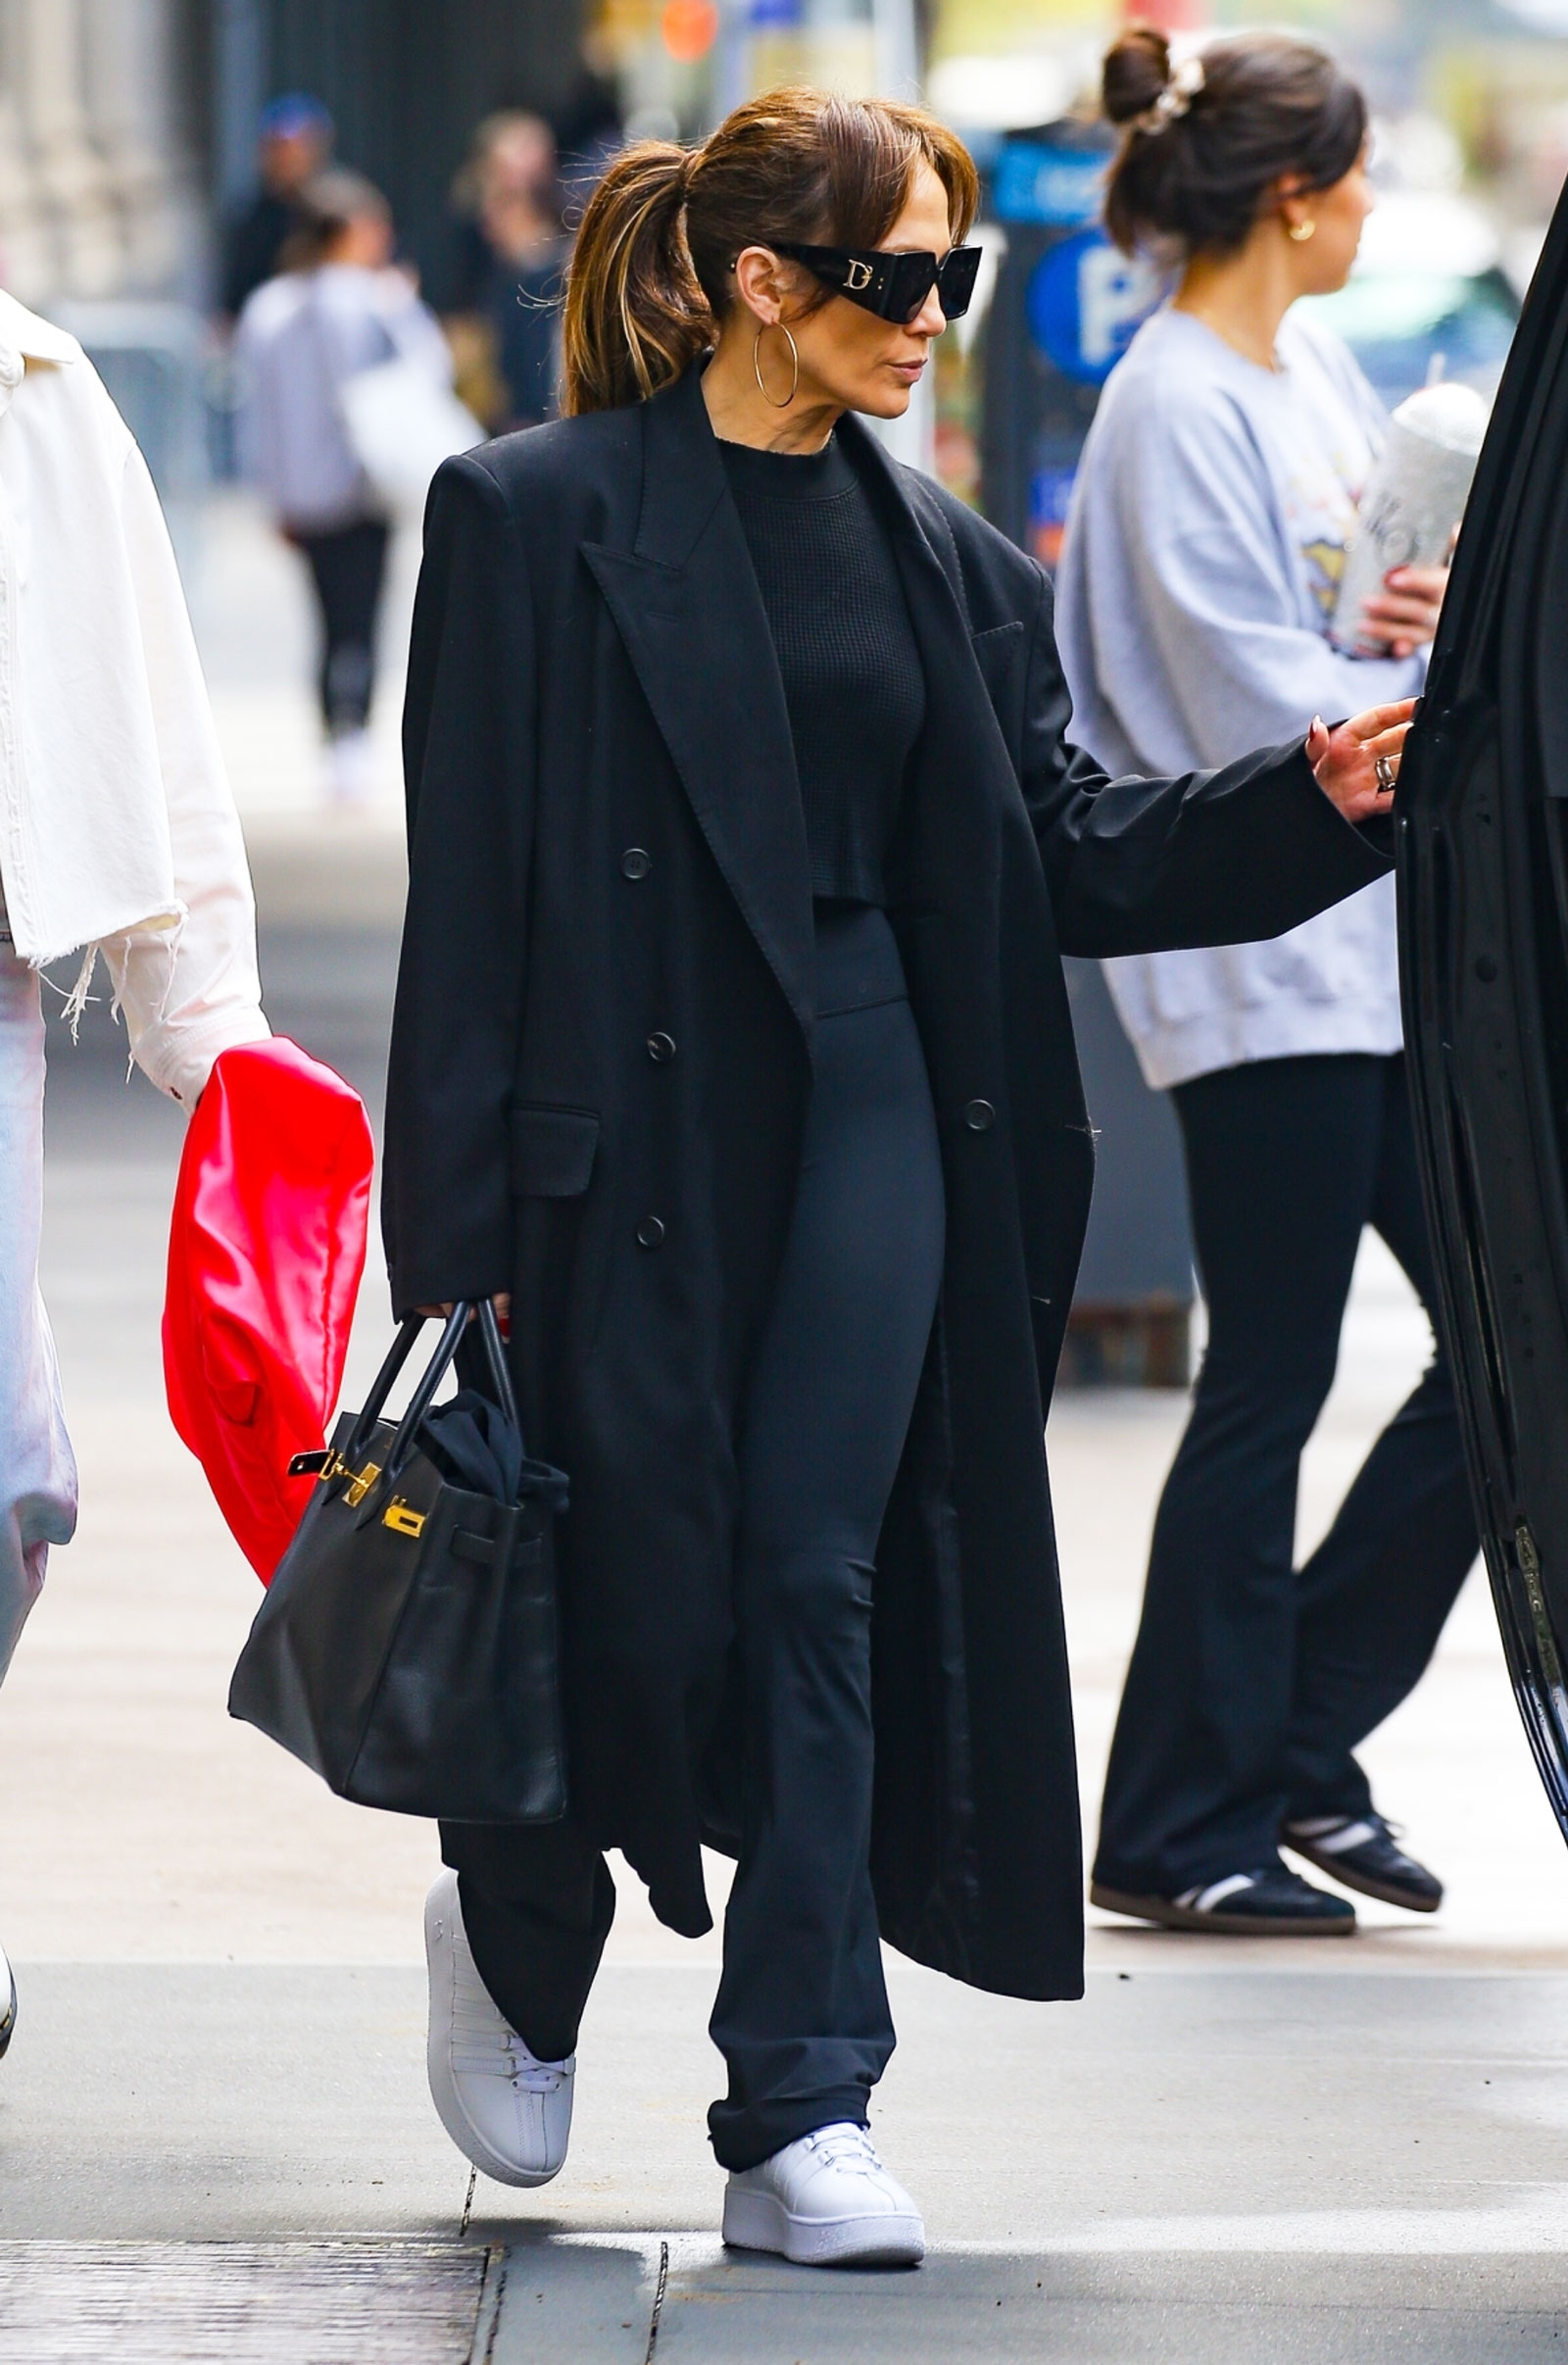 Jennifer Lopez wearing white platform sneakers with leggings and an all-black outfit.